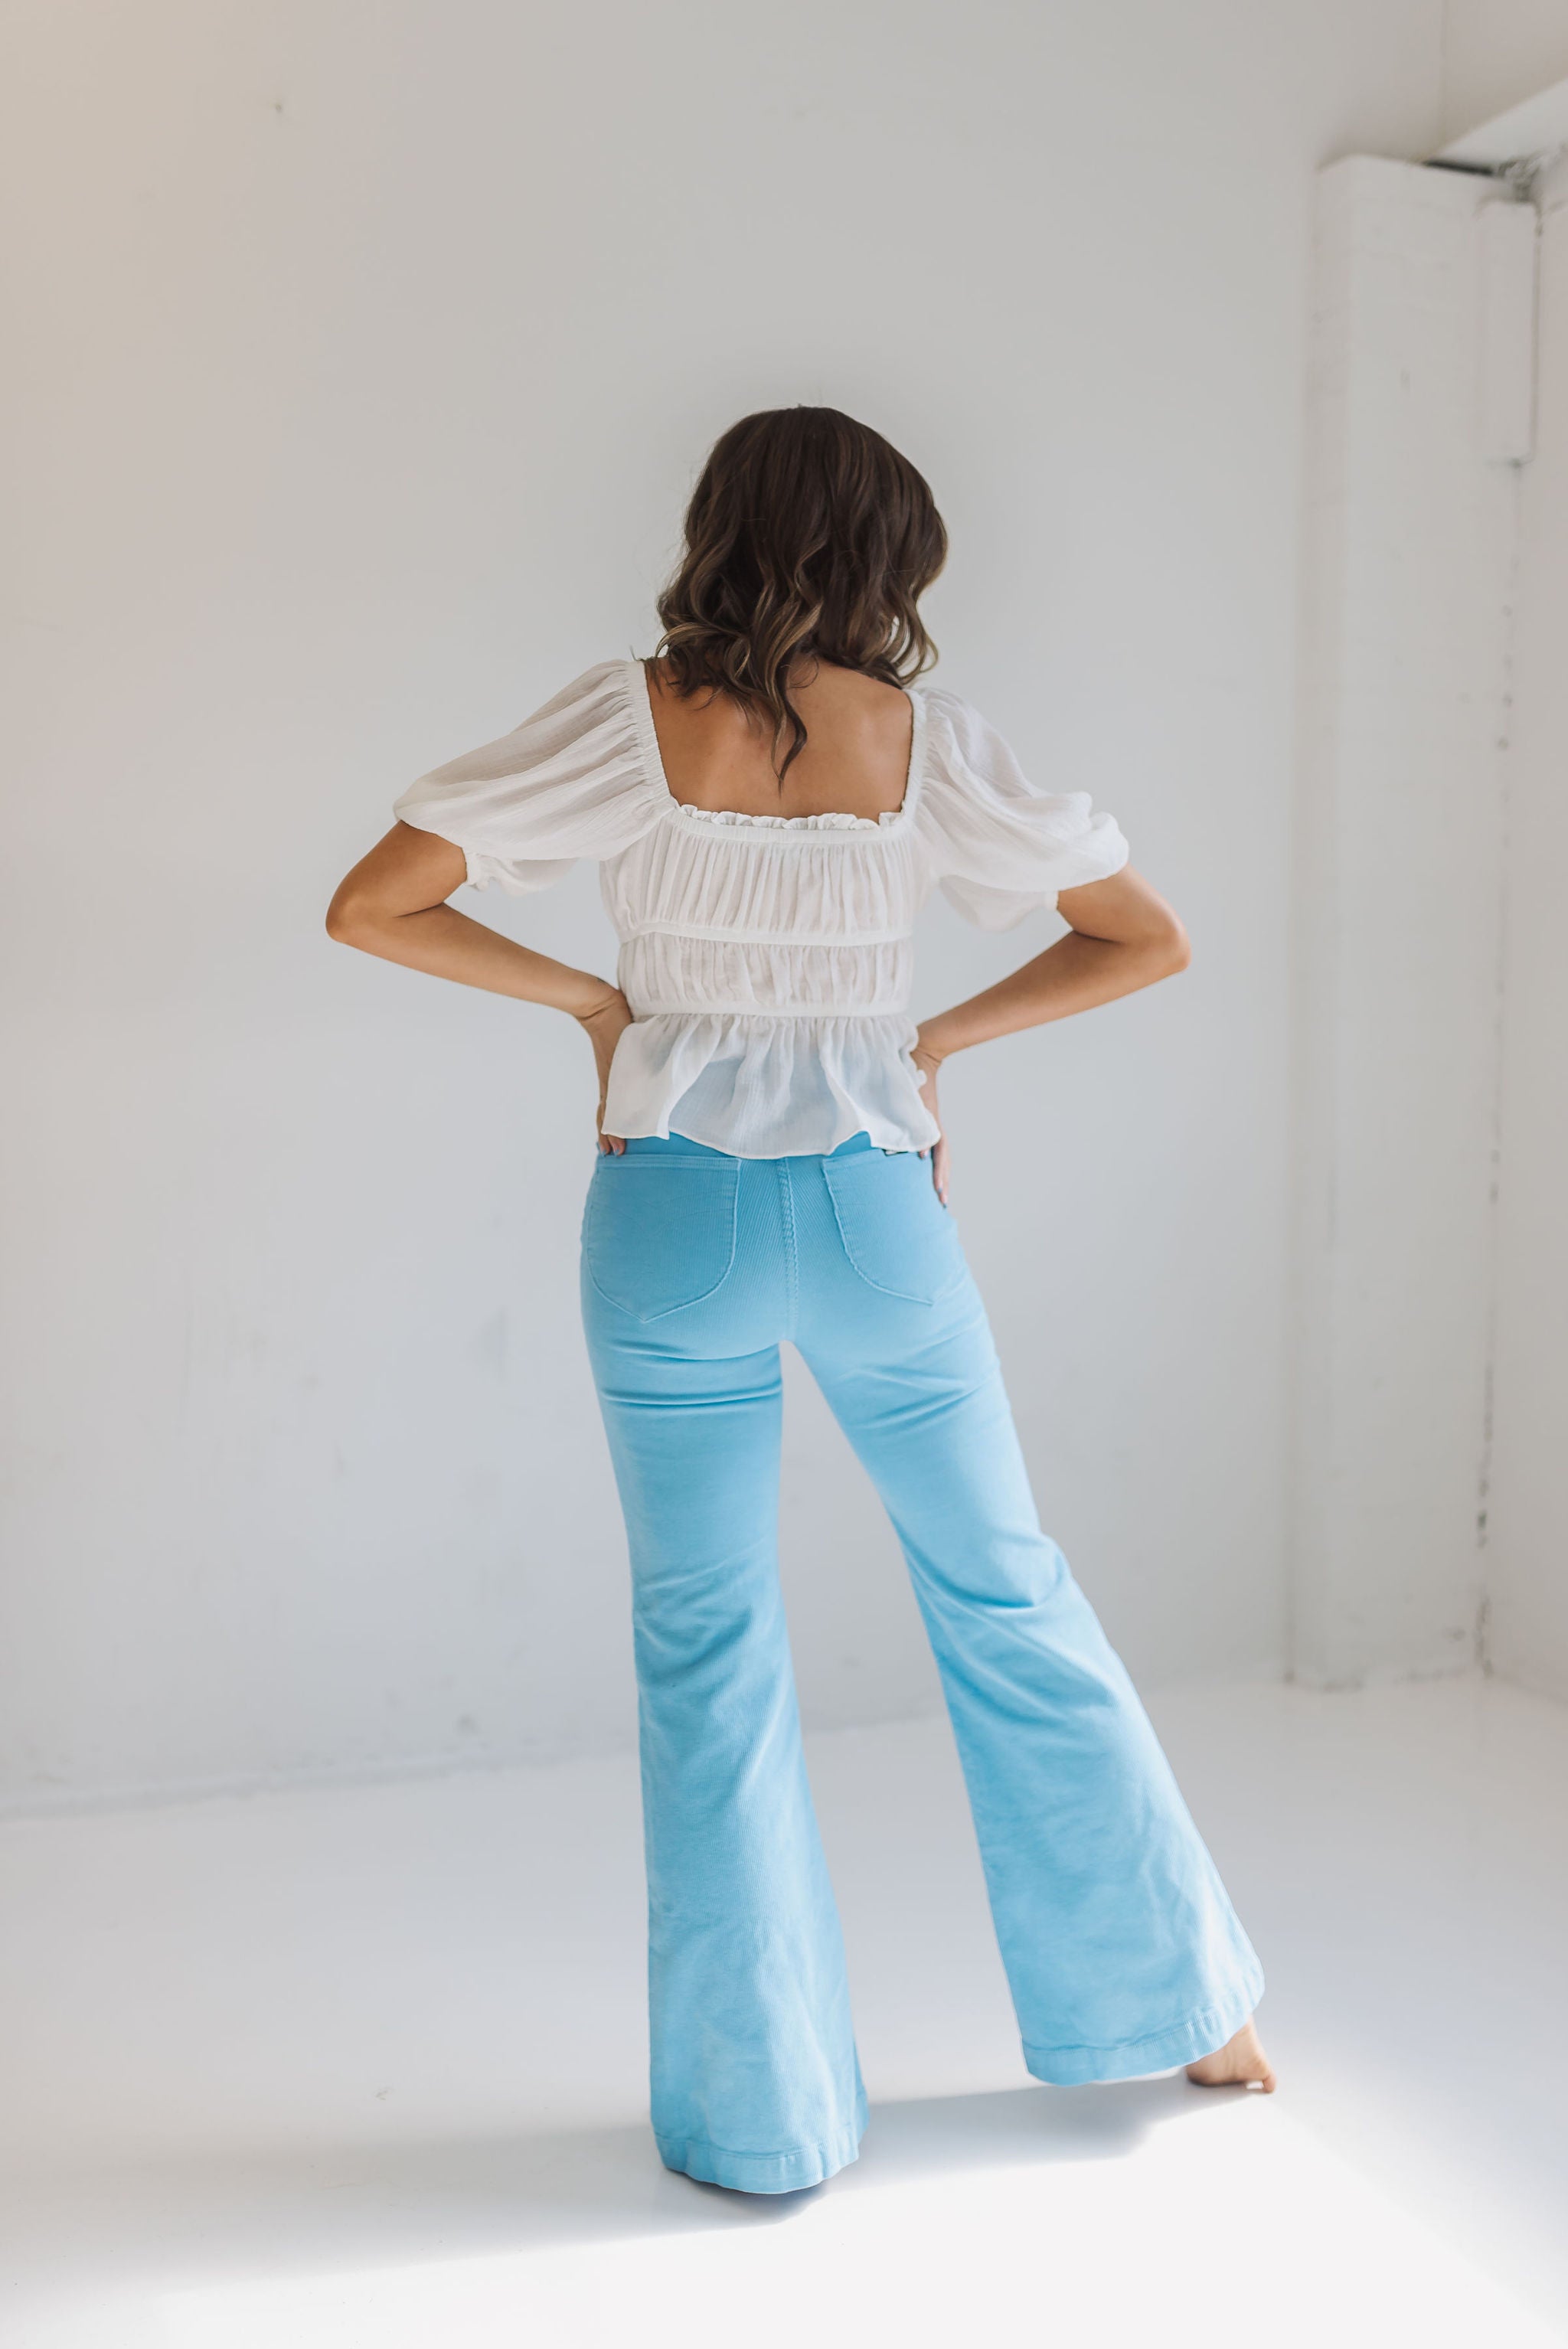 Rear view of East Coast Flare jeans in blue corduroy with flare leg and angled rear pockets.  